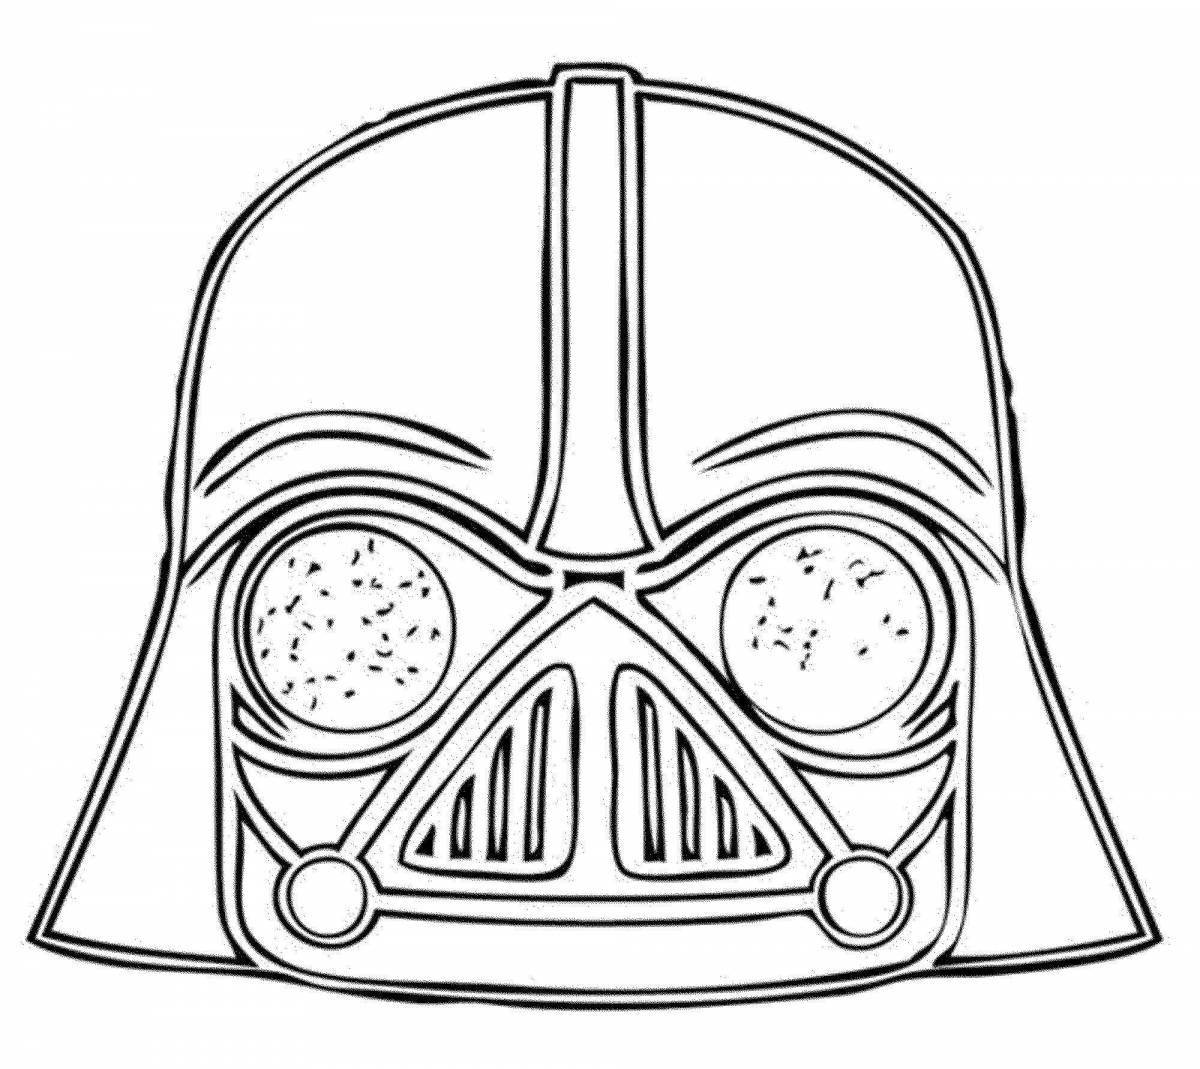 Charming star wars coloring book